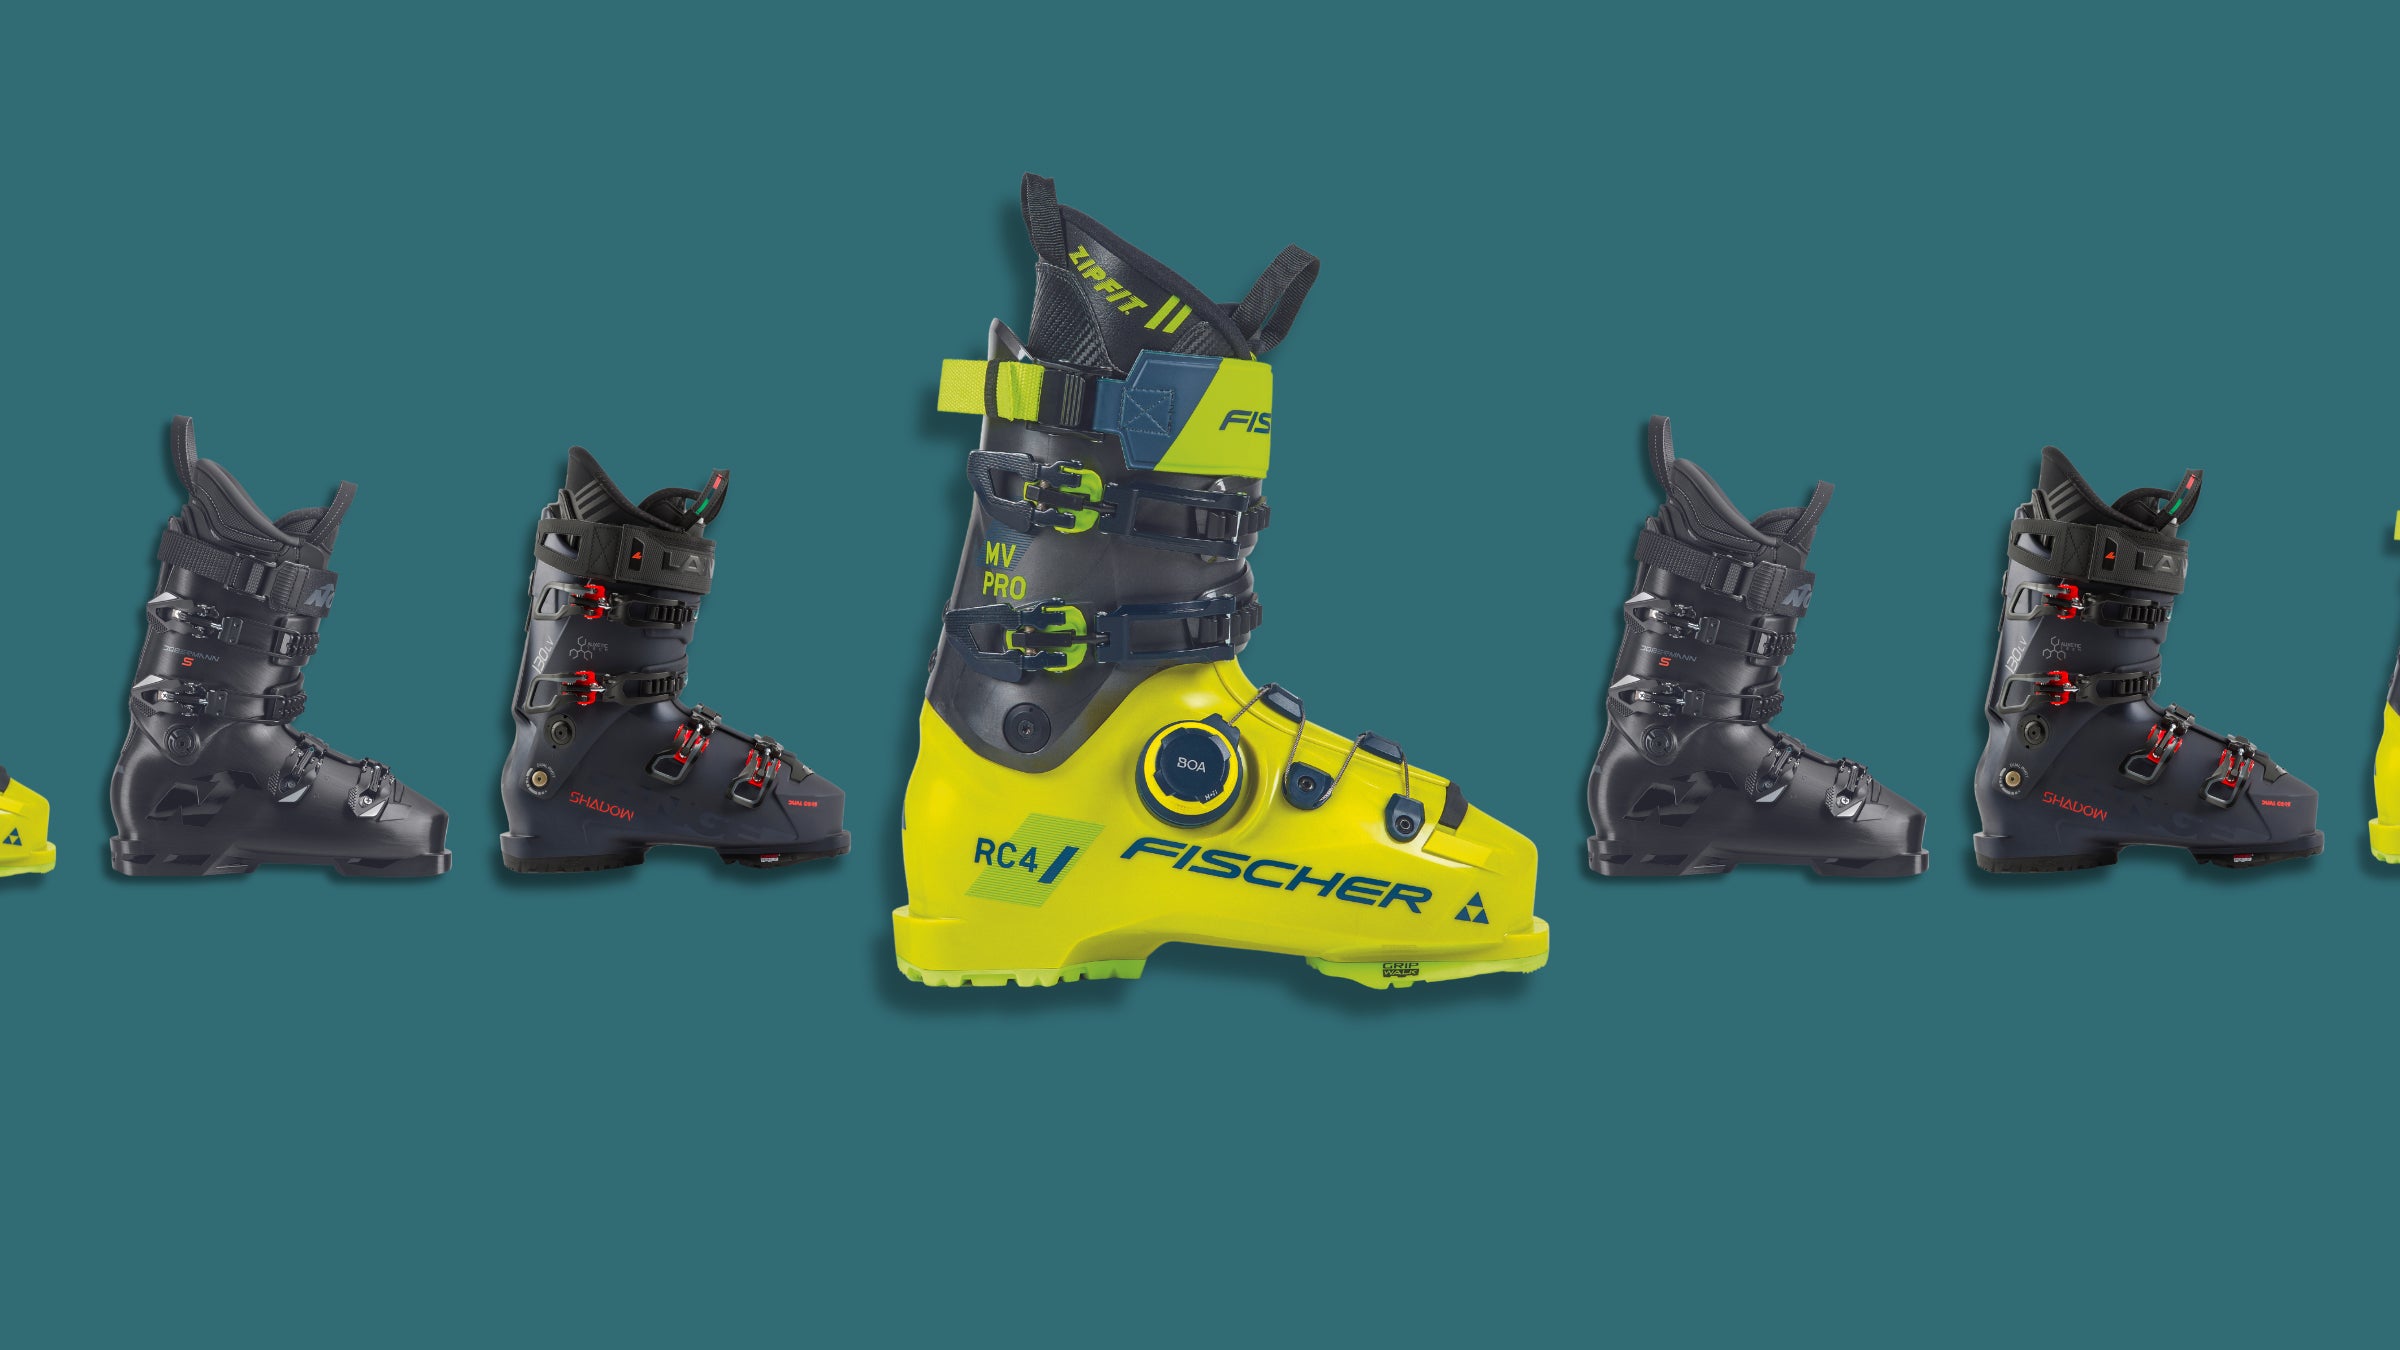 Mens Ski Boots 29 for sale